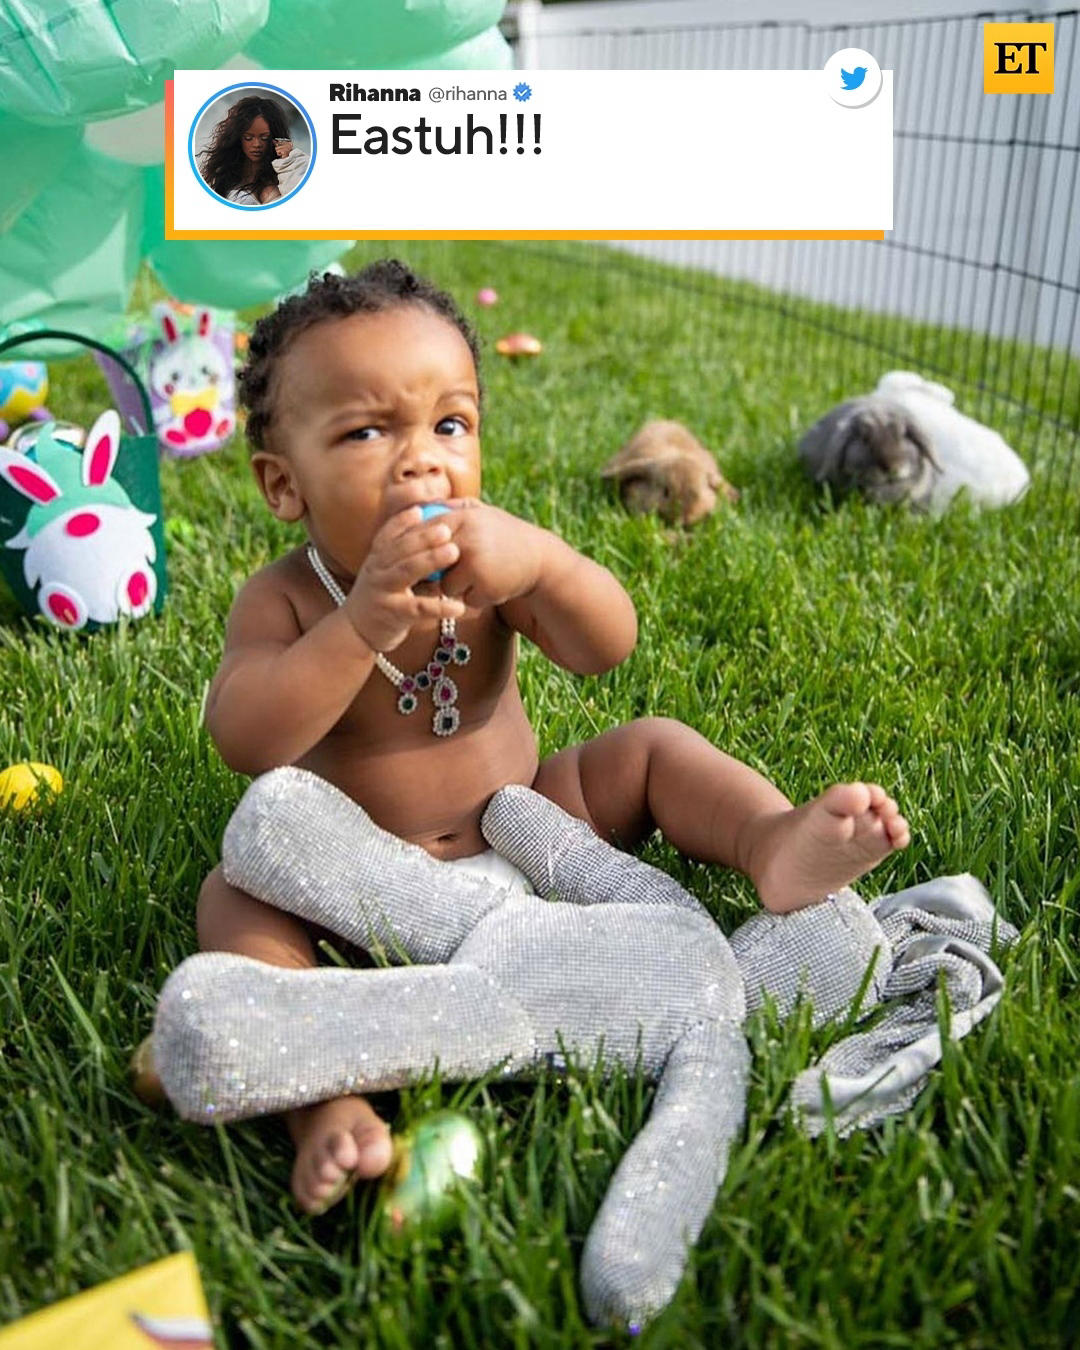 Rihanna’s little Easter bunny is living it up